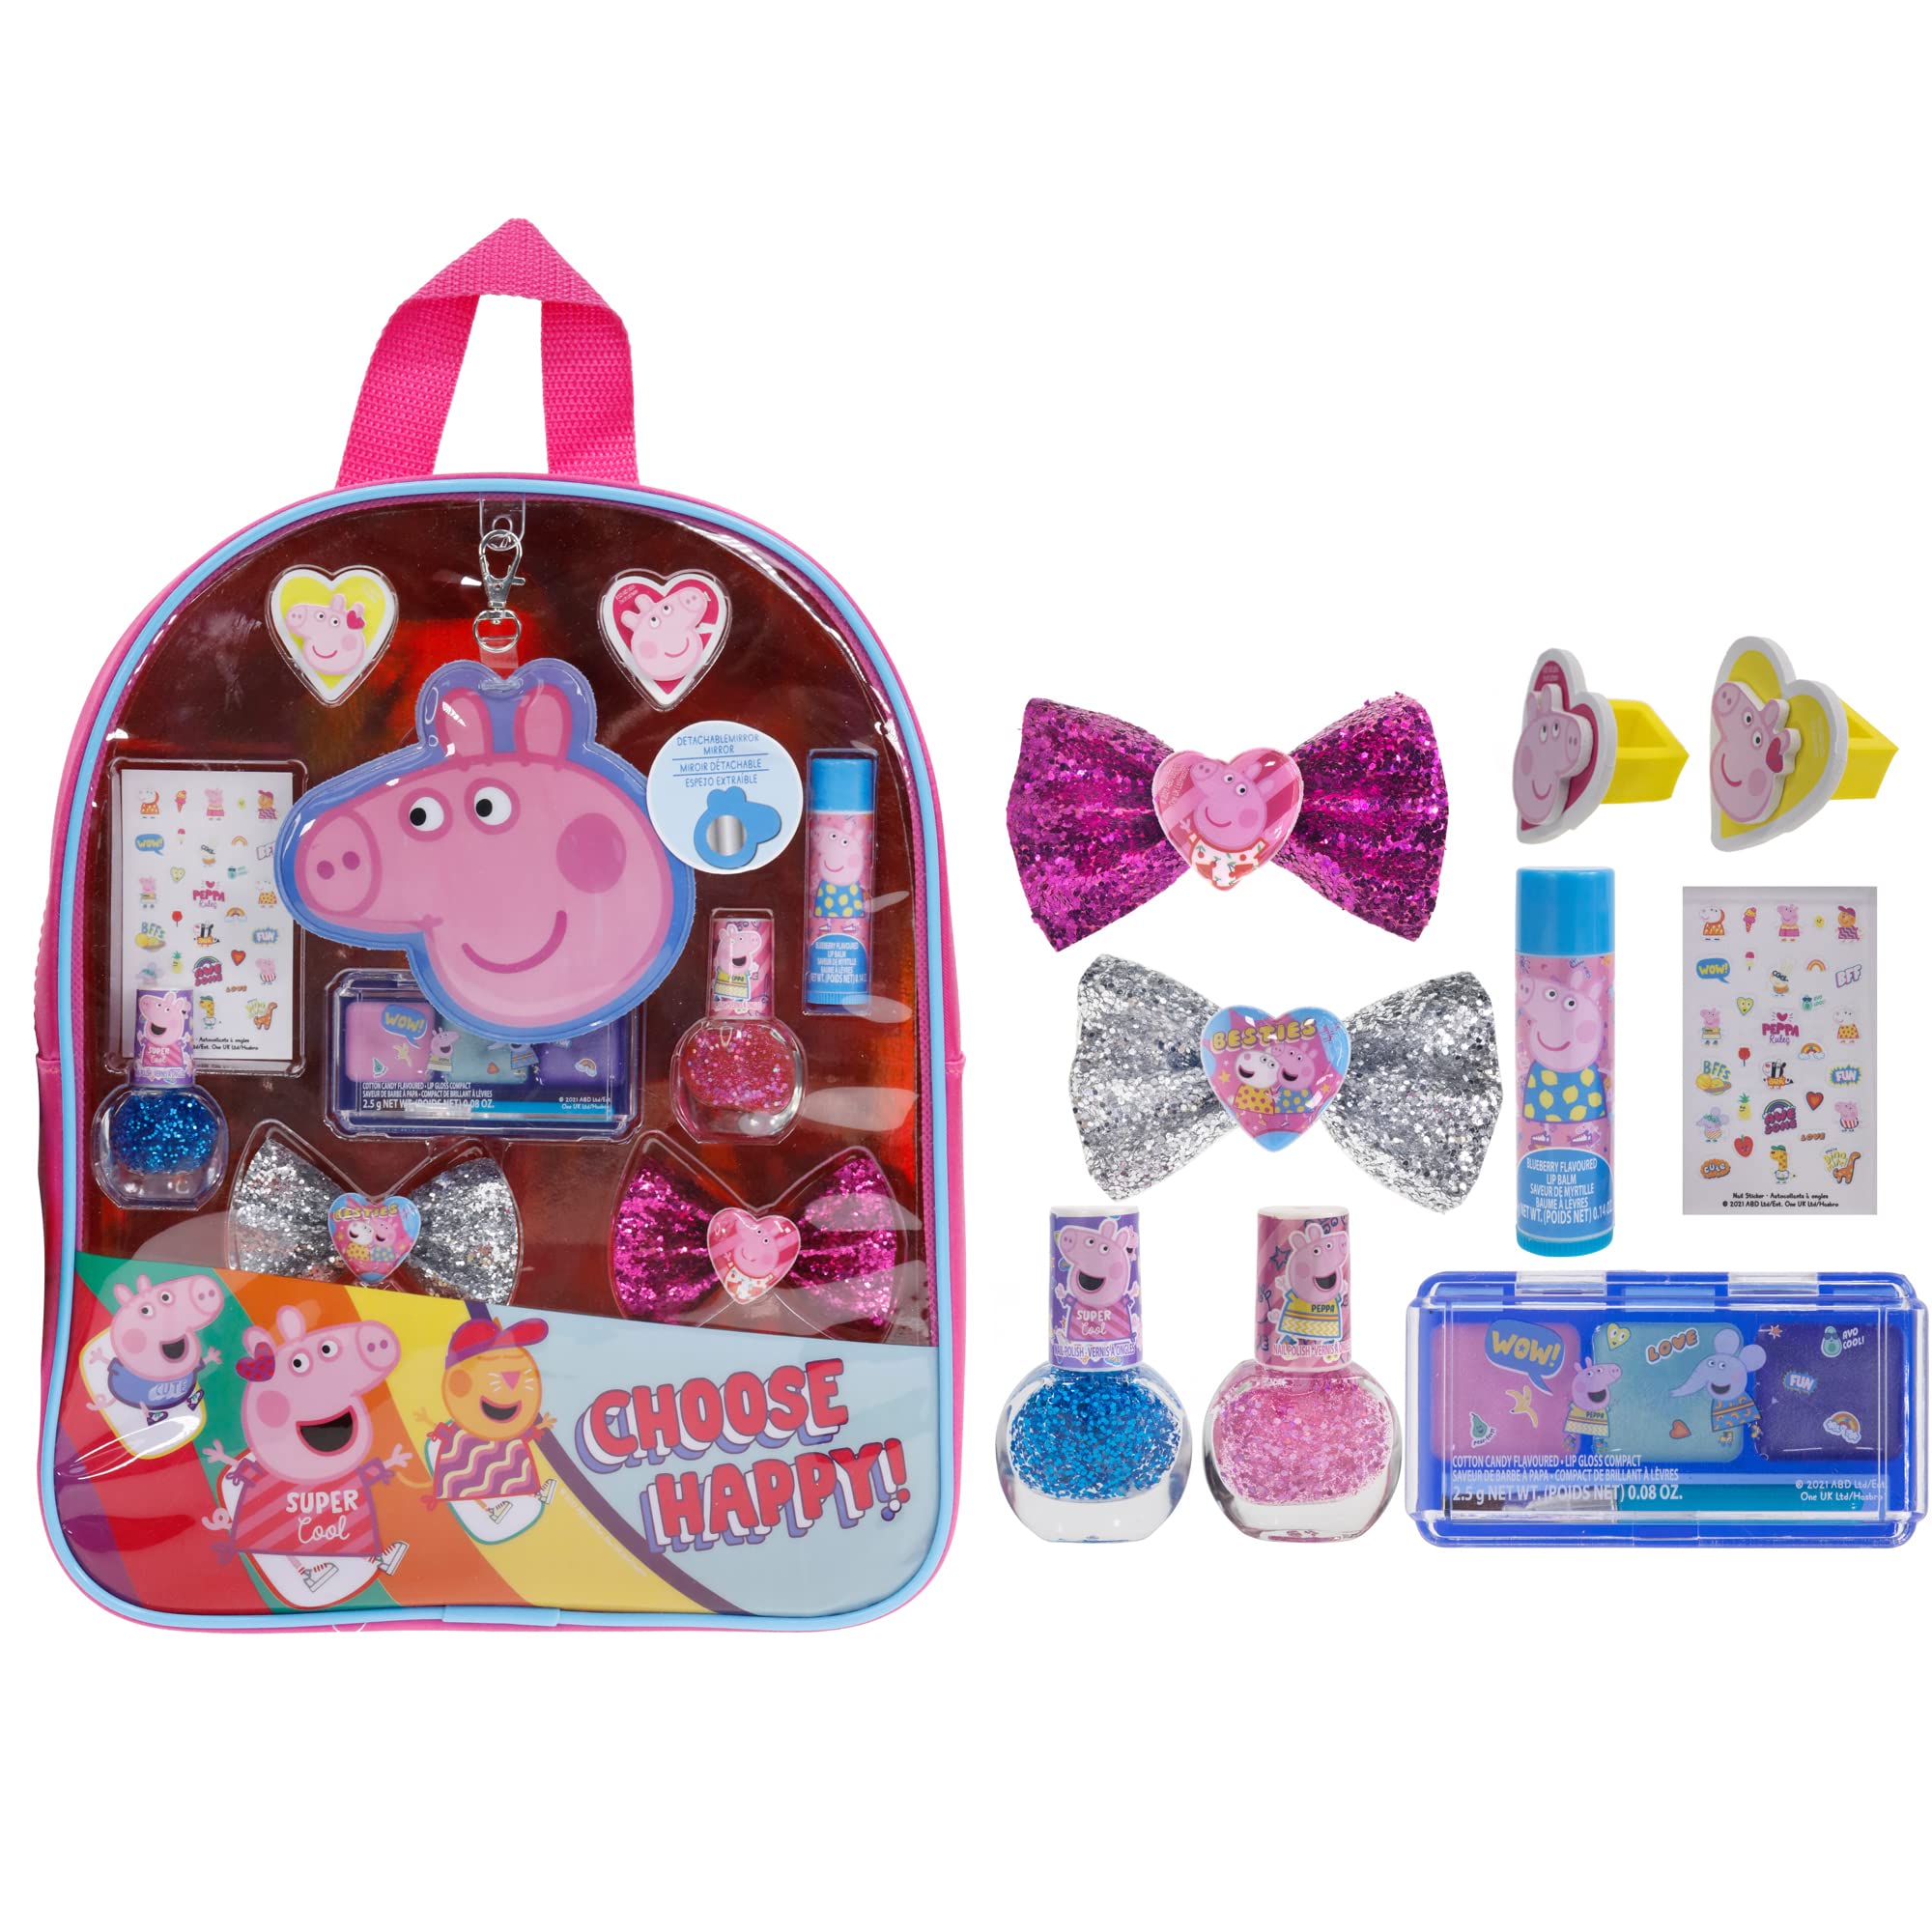 L.O.L Surprise! Townley Girl Backpack Beauty Cosmetic Make-Up Set, Pretend Play Toy and Gift for Girls Ages 5+, 11 ct, Other